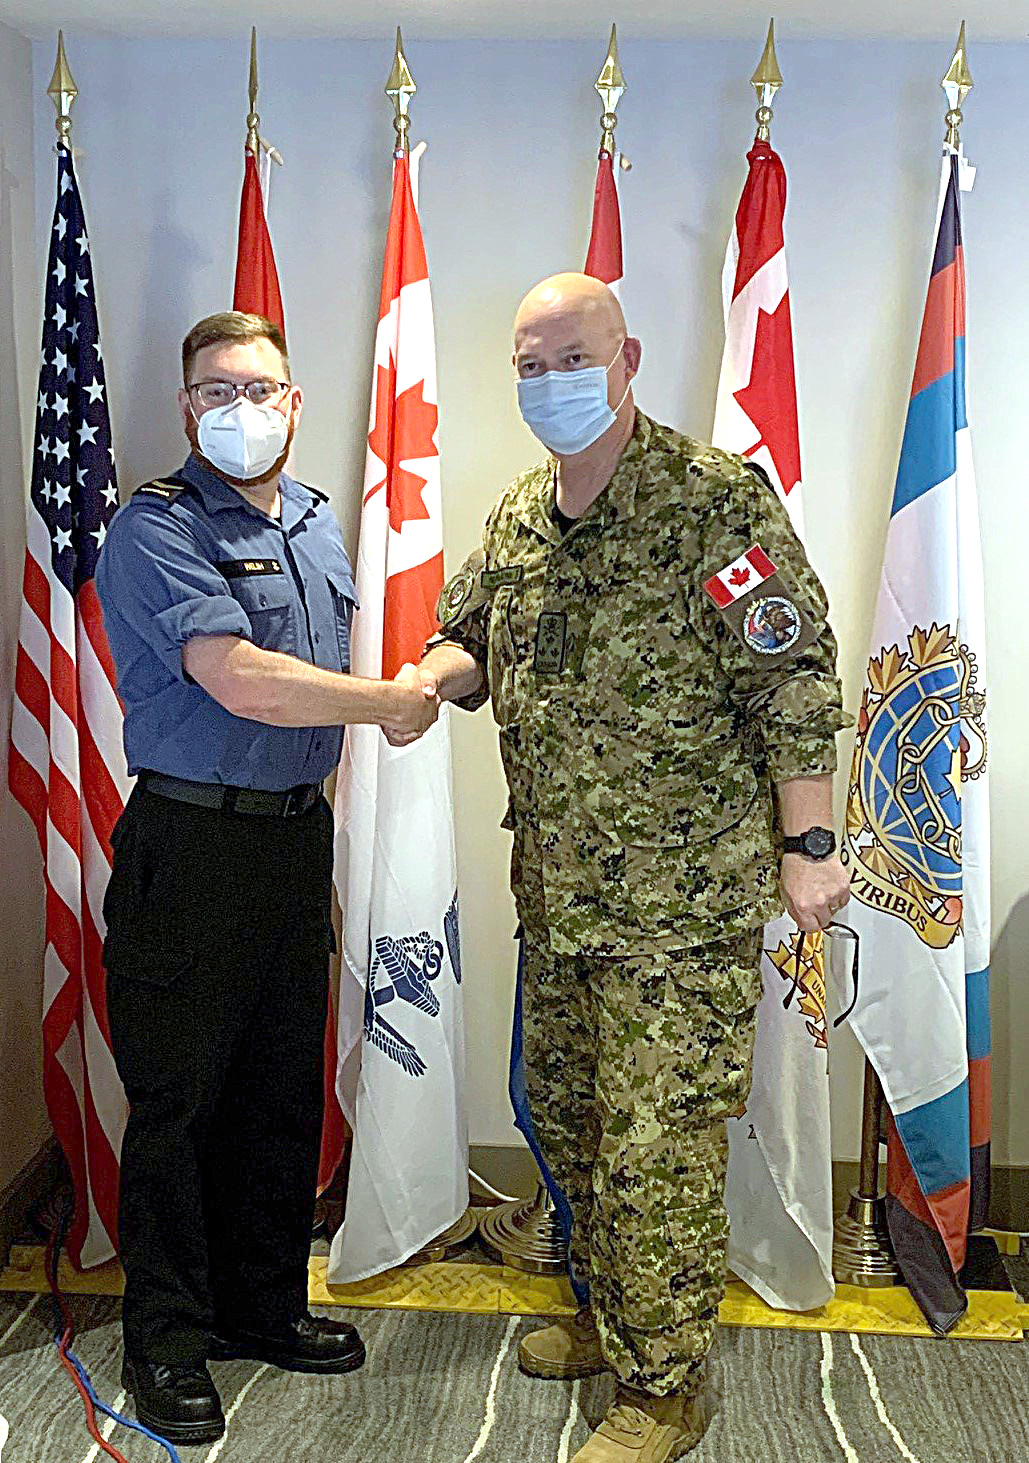 Sailor First Class Jeramie Welsh was presented with a Commander Canadian Joint Operations Command Coin for Excellence during deployment on RIMPAC 22 in Honolulu, Hawaii, by Vice-Admiral Bob Auchterlonie, Commander CJOC.